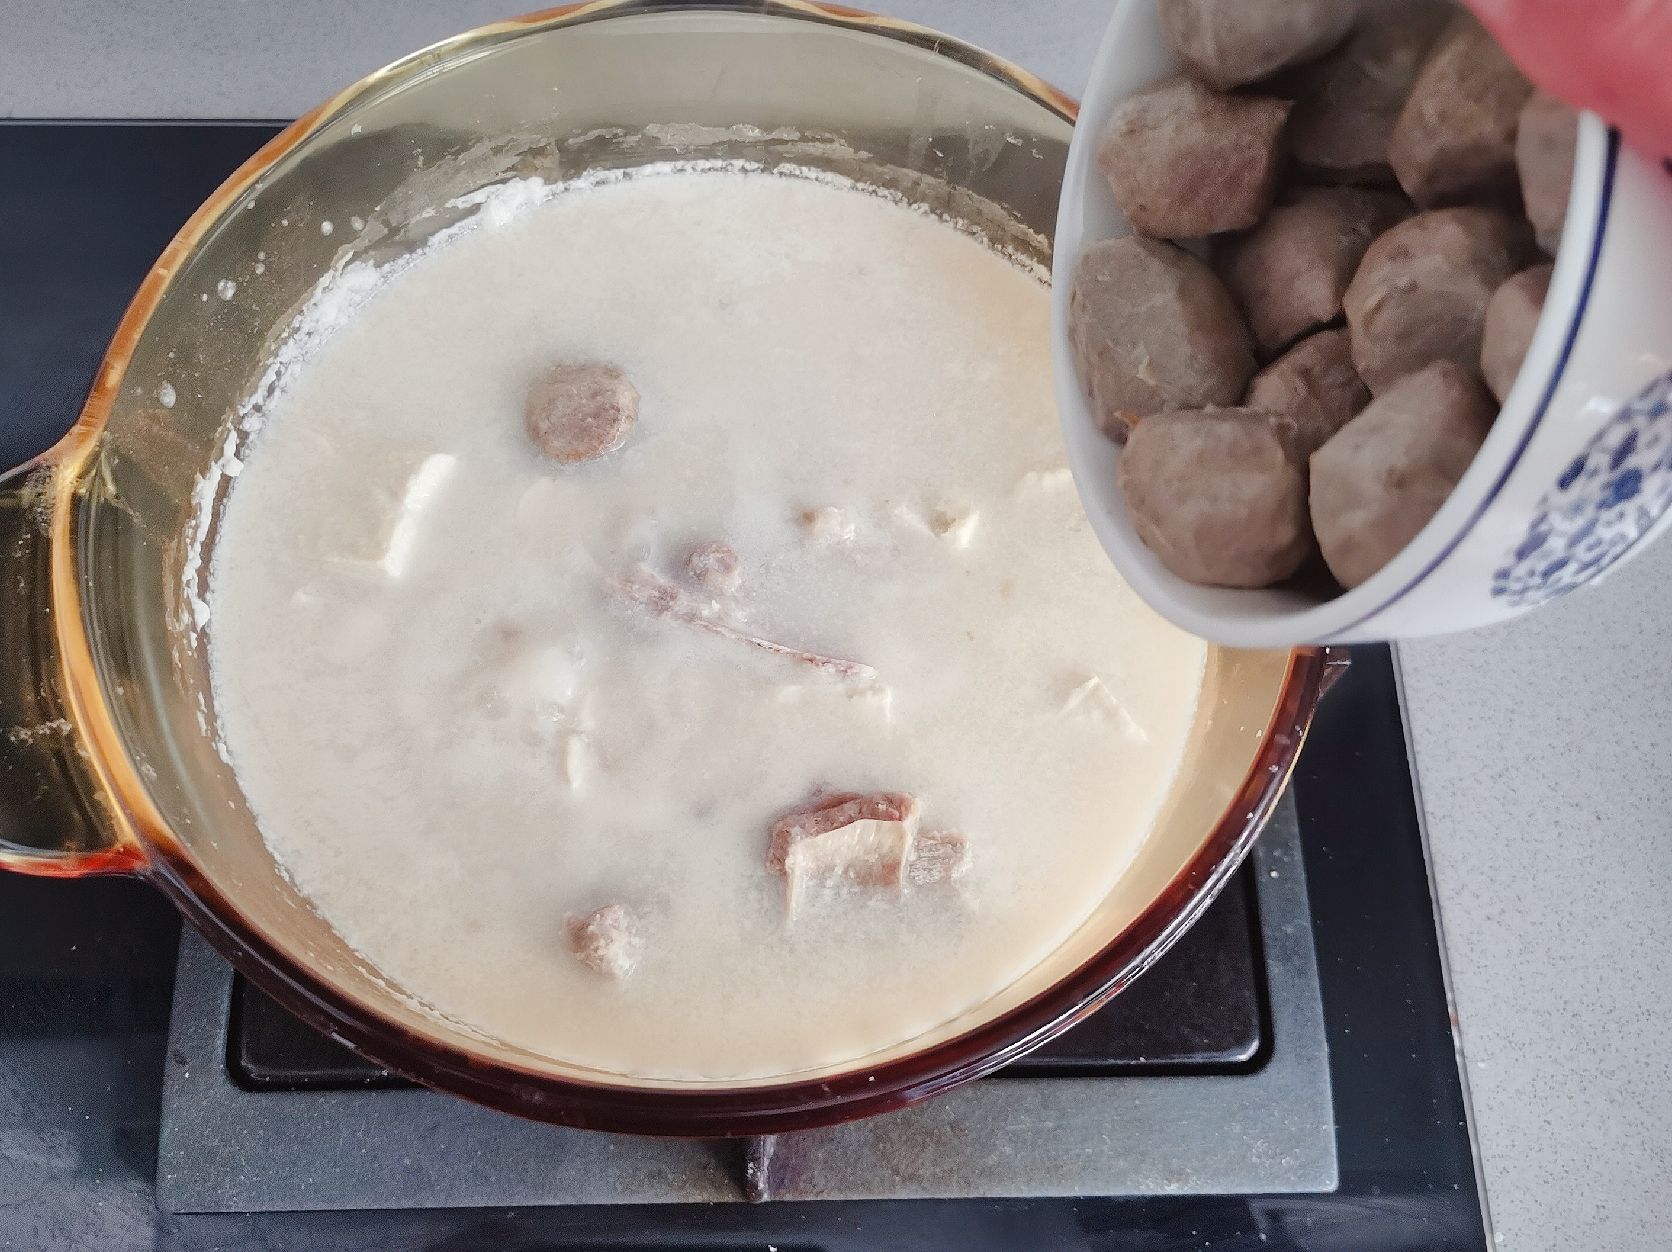 Soy Milk Hot Pot with Delicious Soup recipe